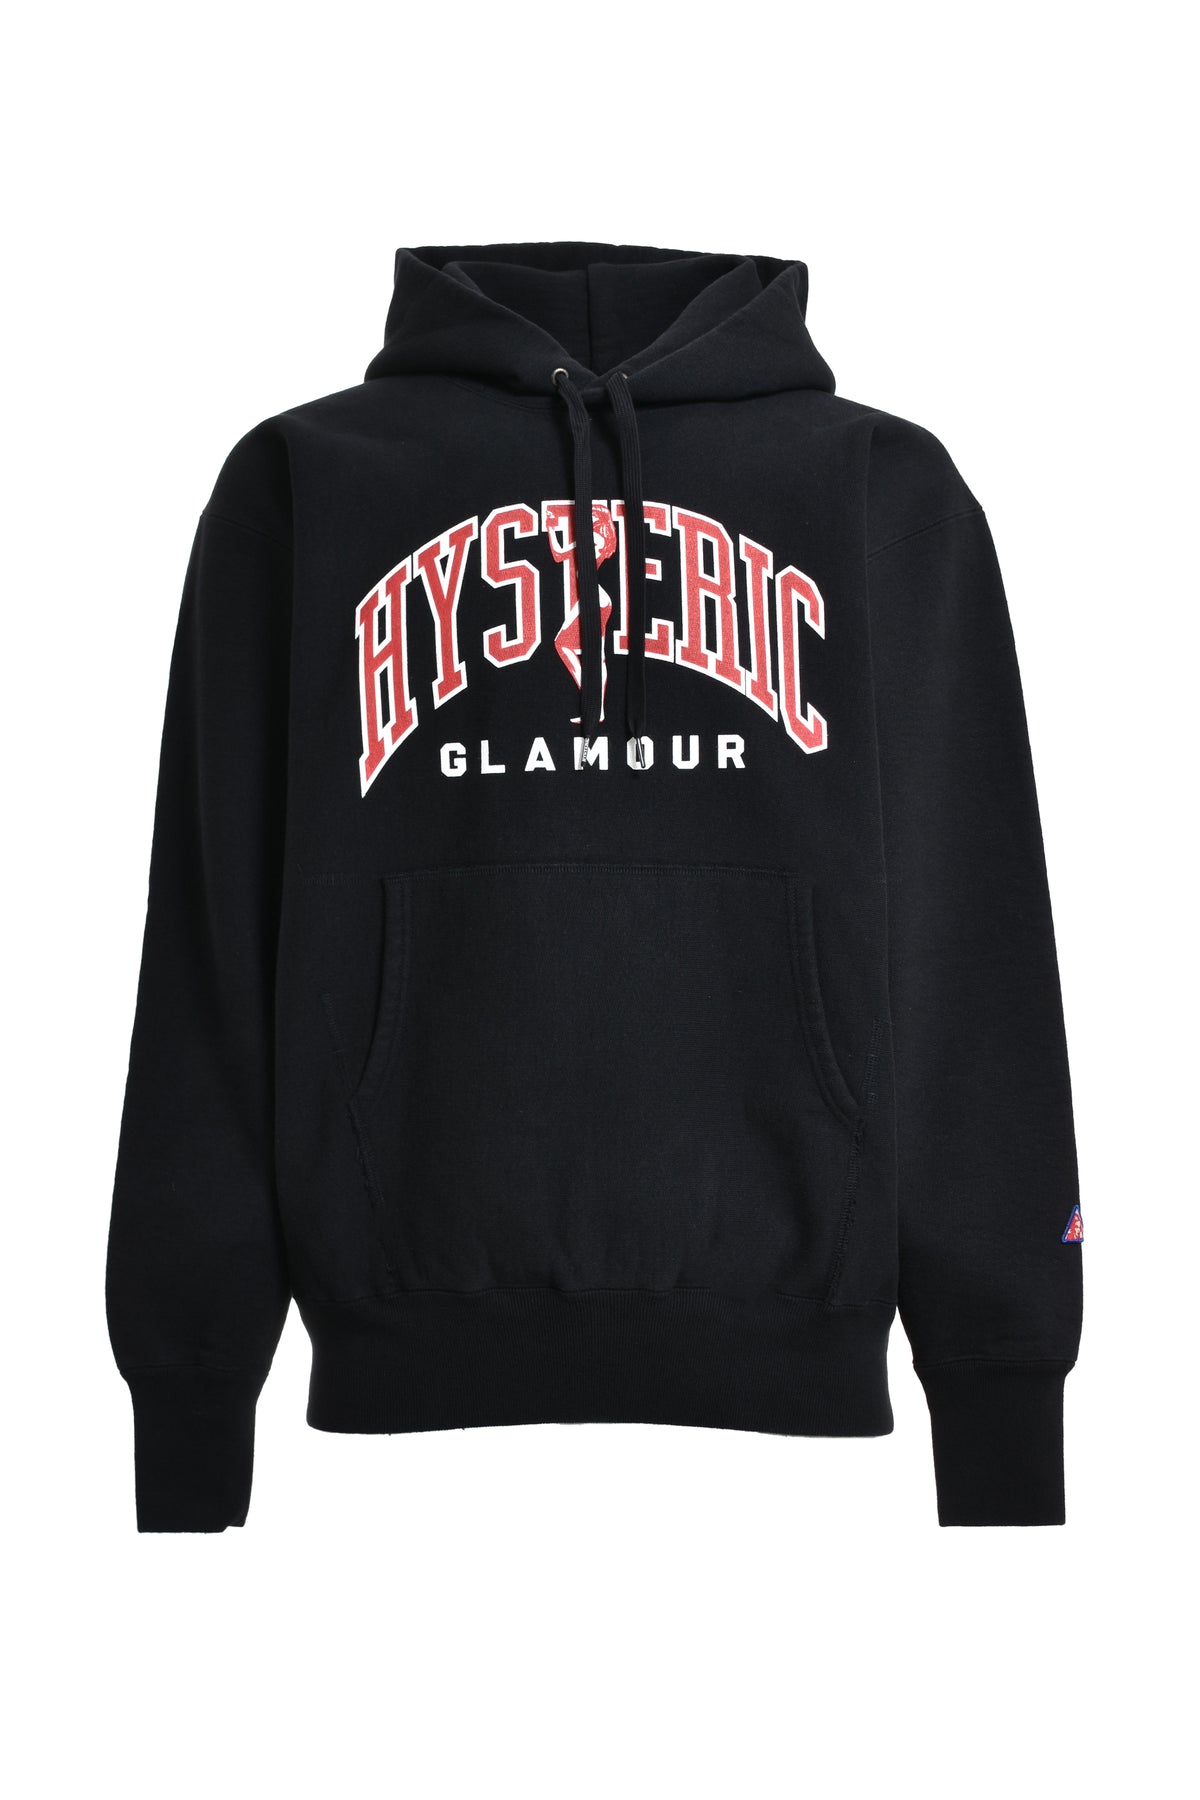 HYSTERIC GLAMOUR ) ヒステリックグラマー